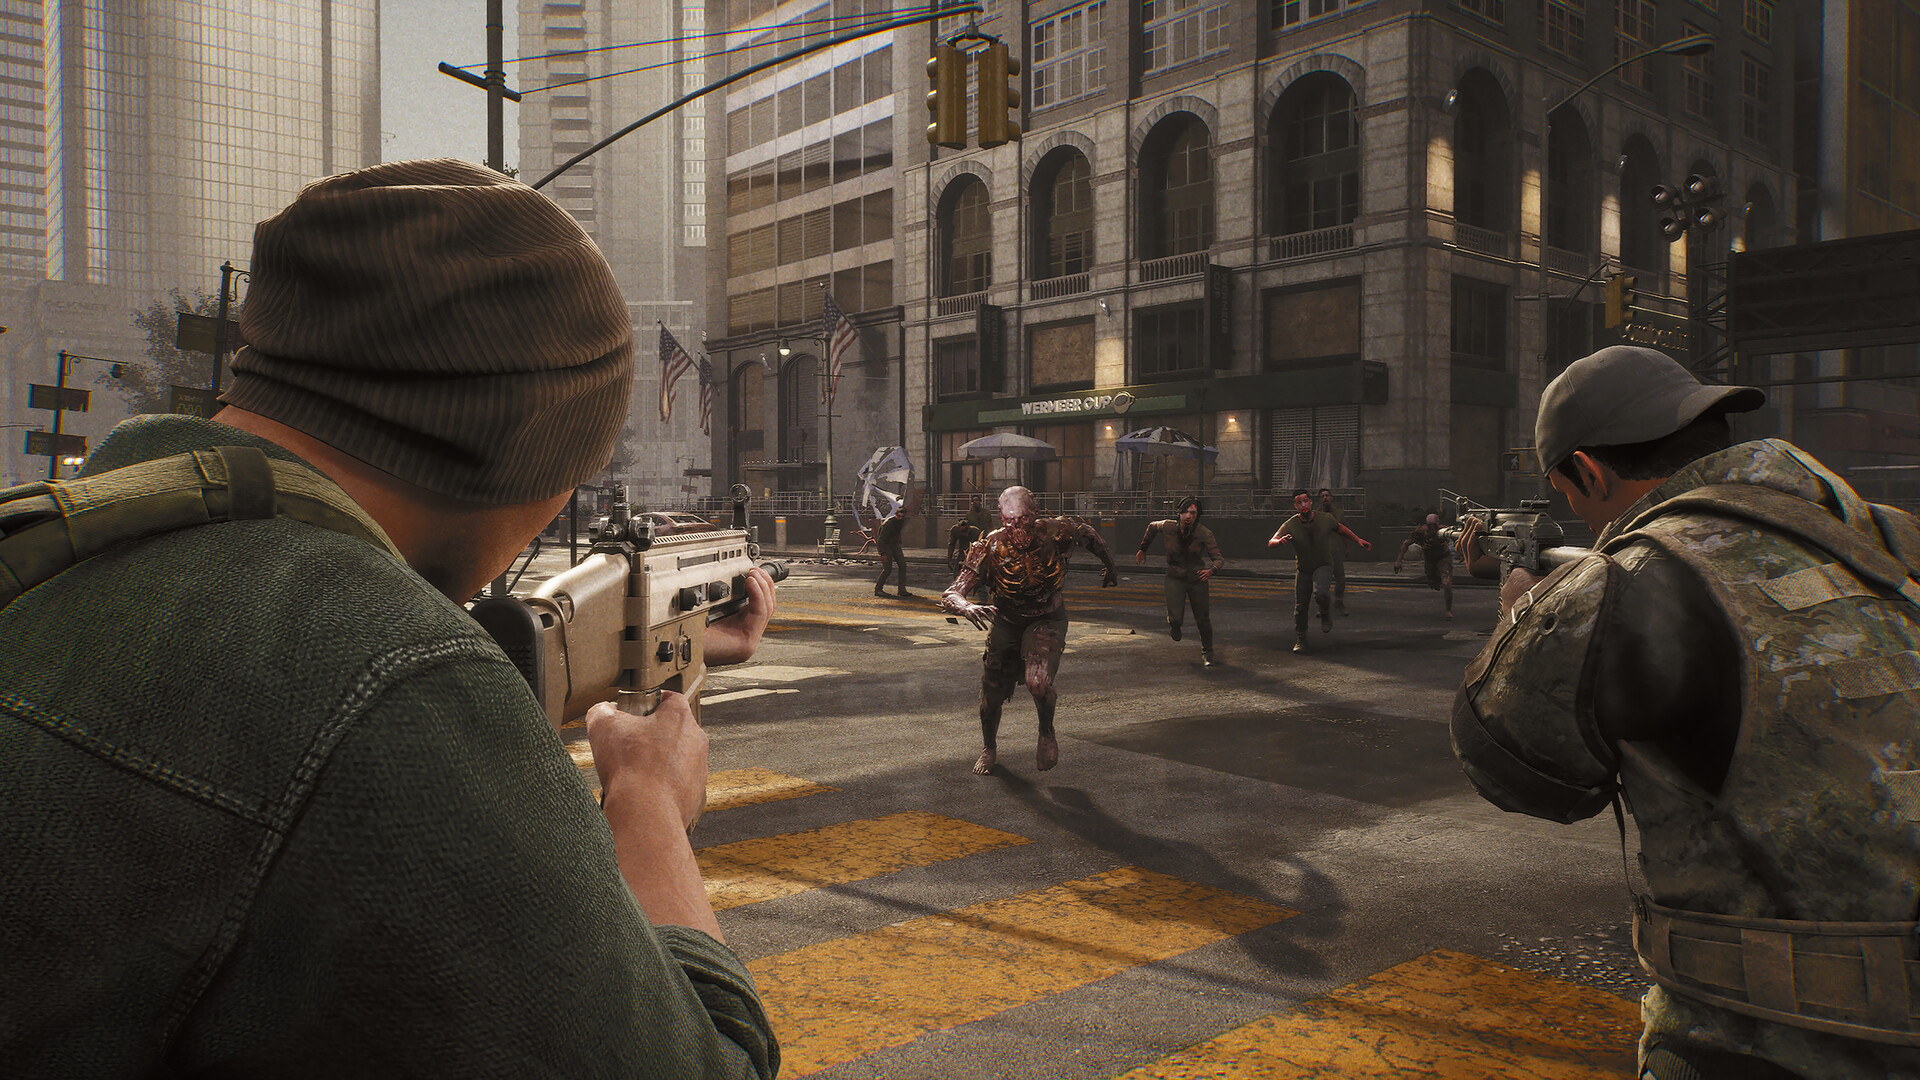 A screenshot from the video game "The Day Before:" Two white men aim guns at a zombie walking down a city street